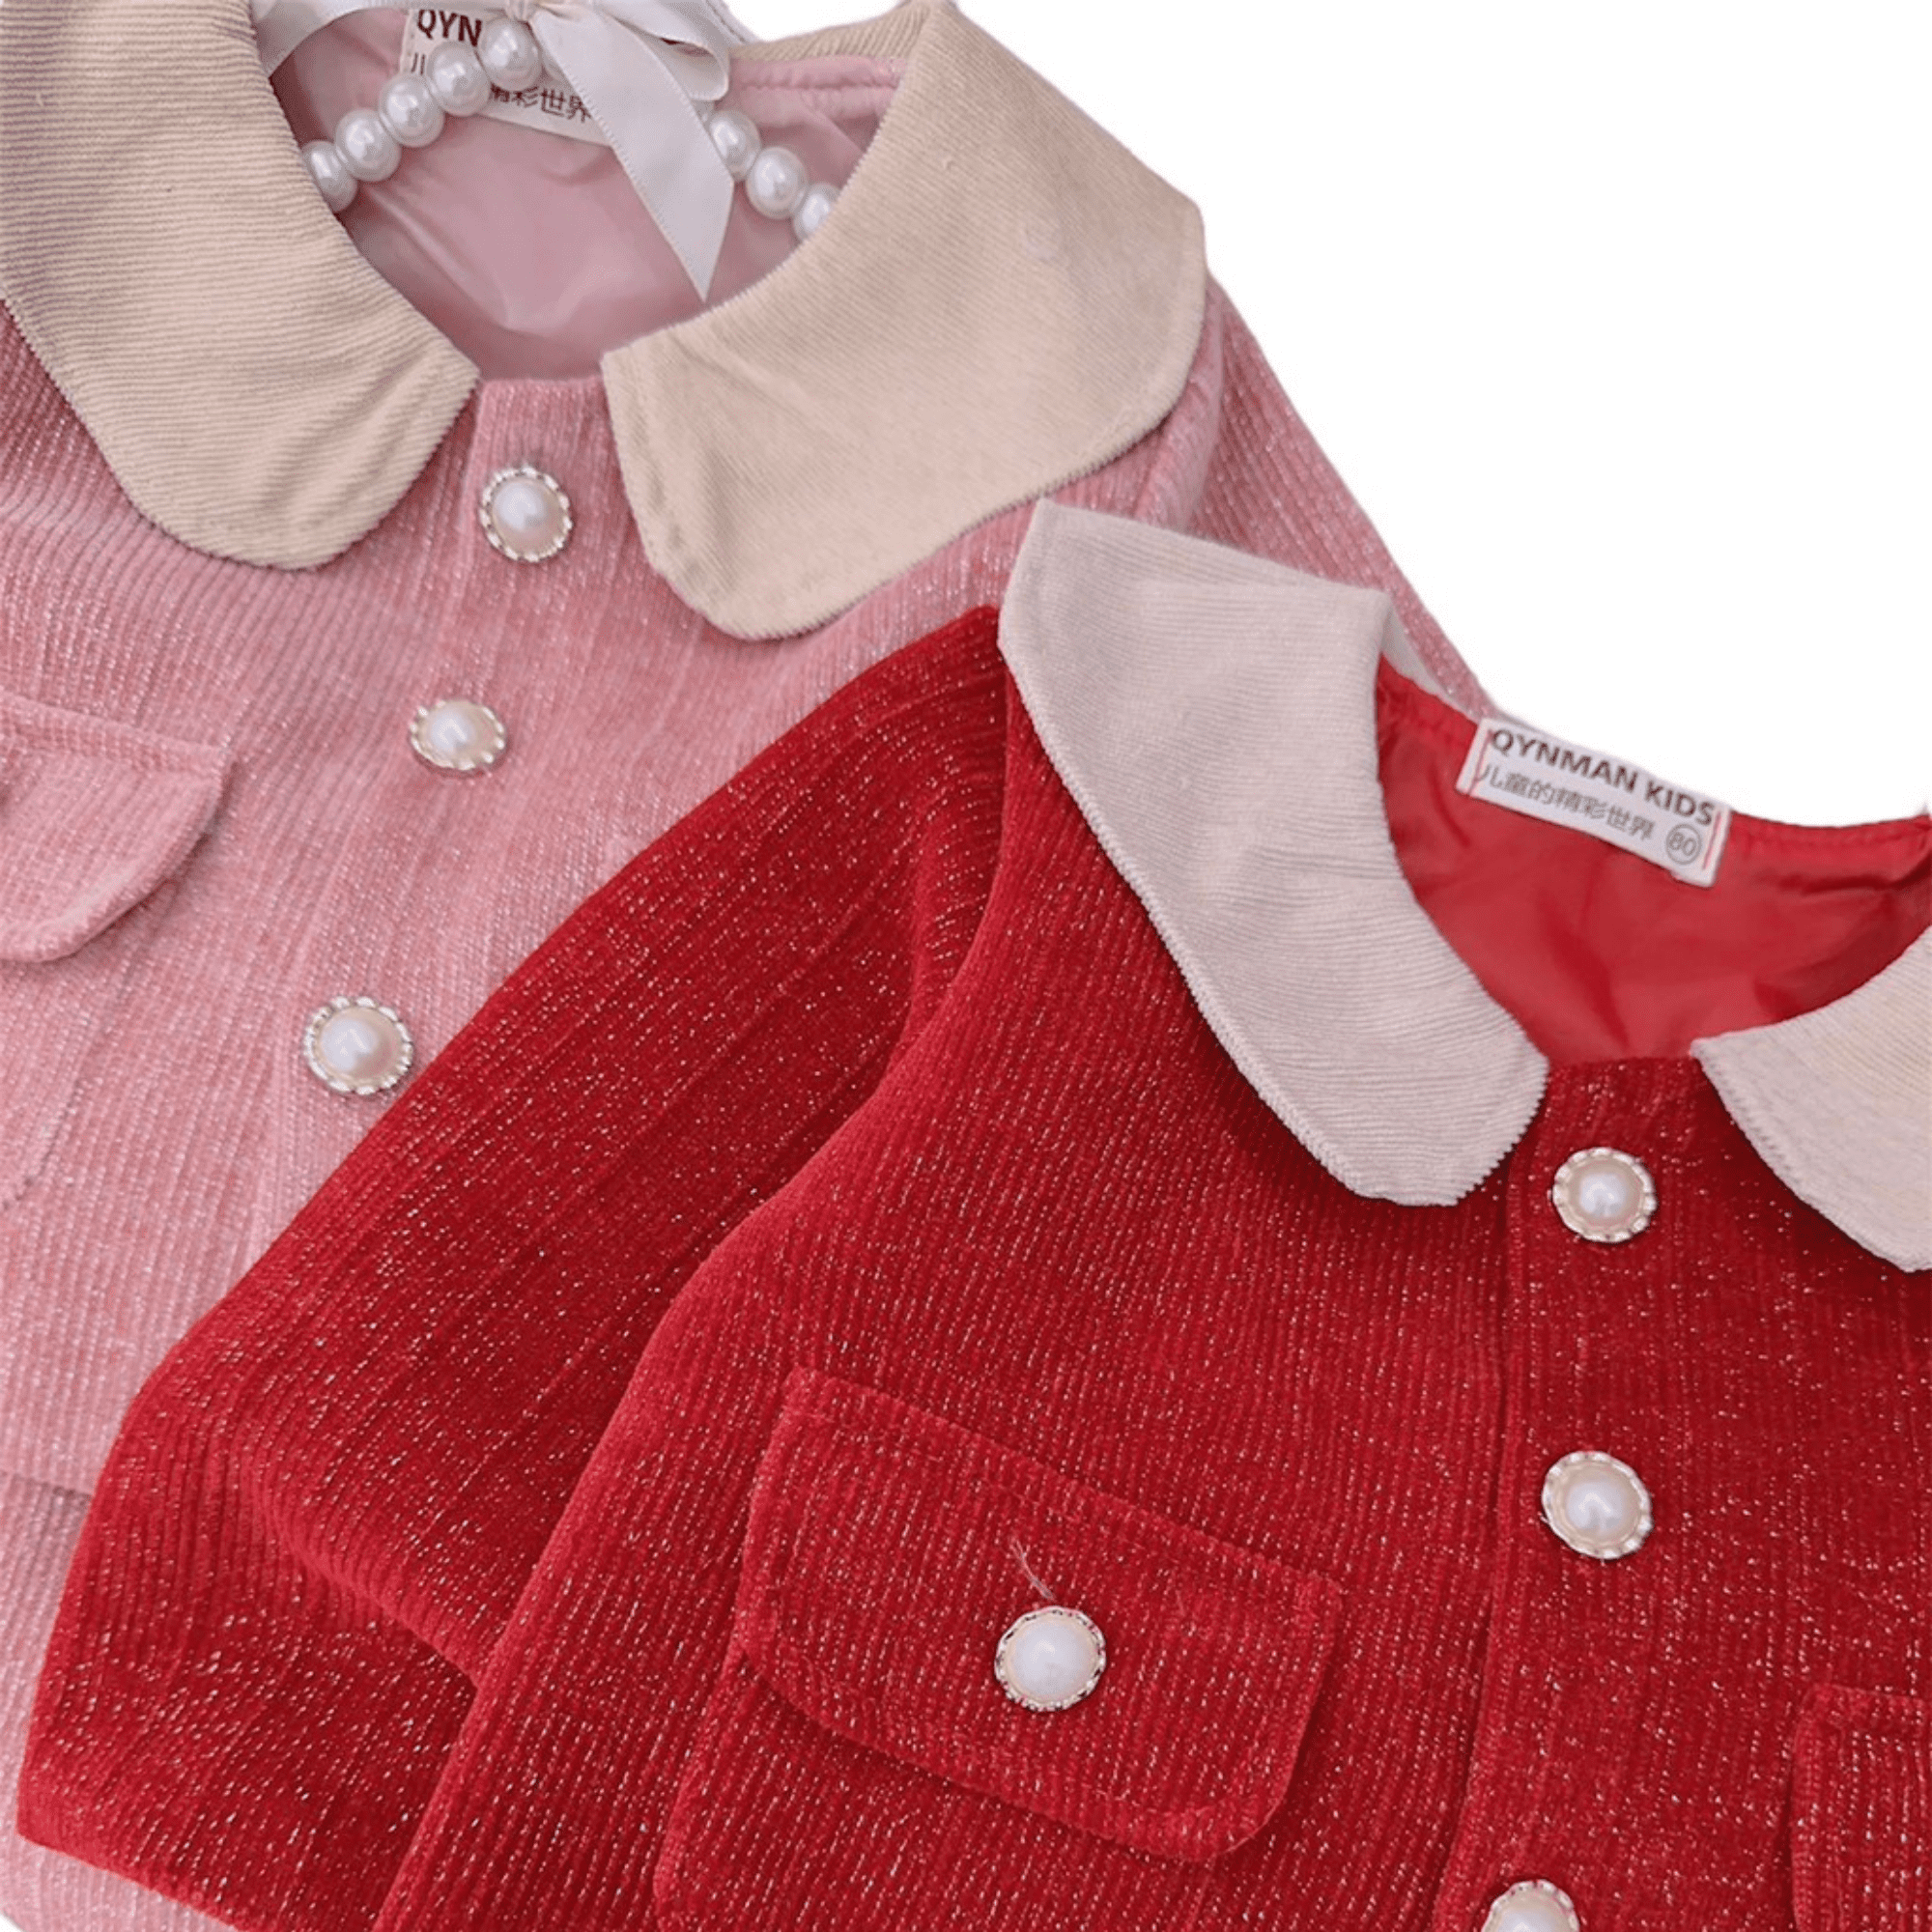 Winter Clothes For Kids High Quality Natural Dresses Casual Each One In Opp Bag From Vietnam Manufacturer